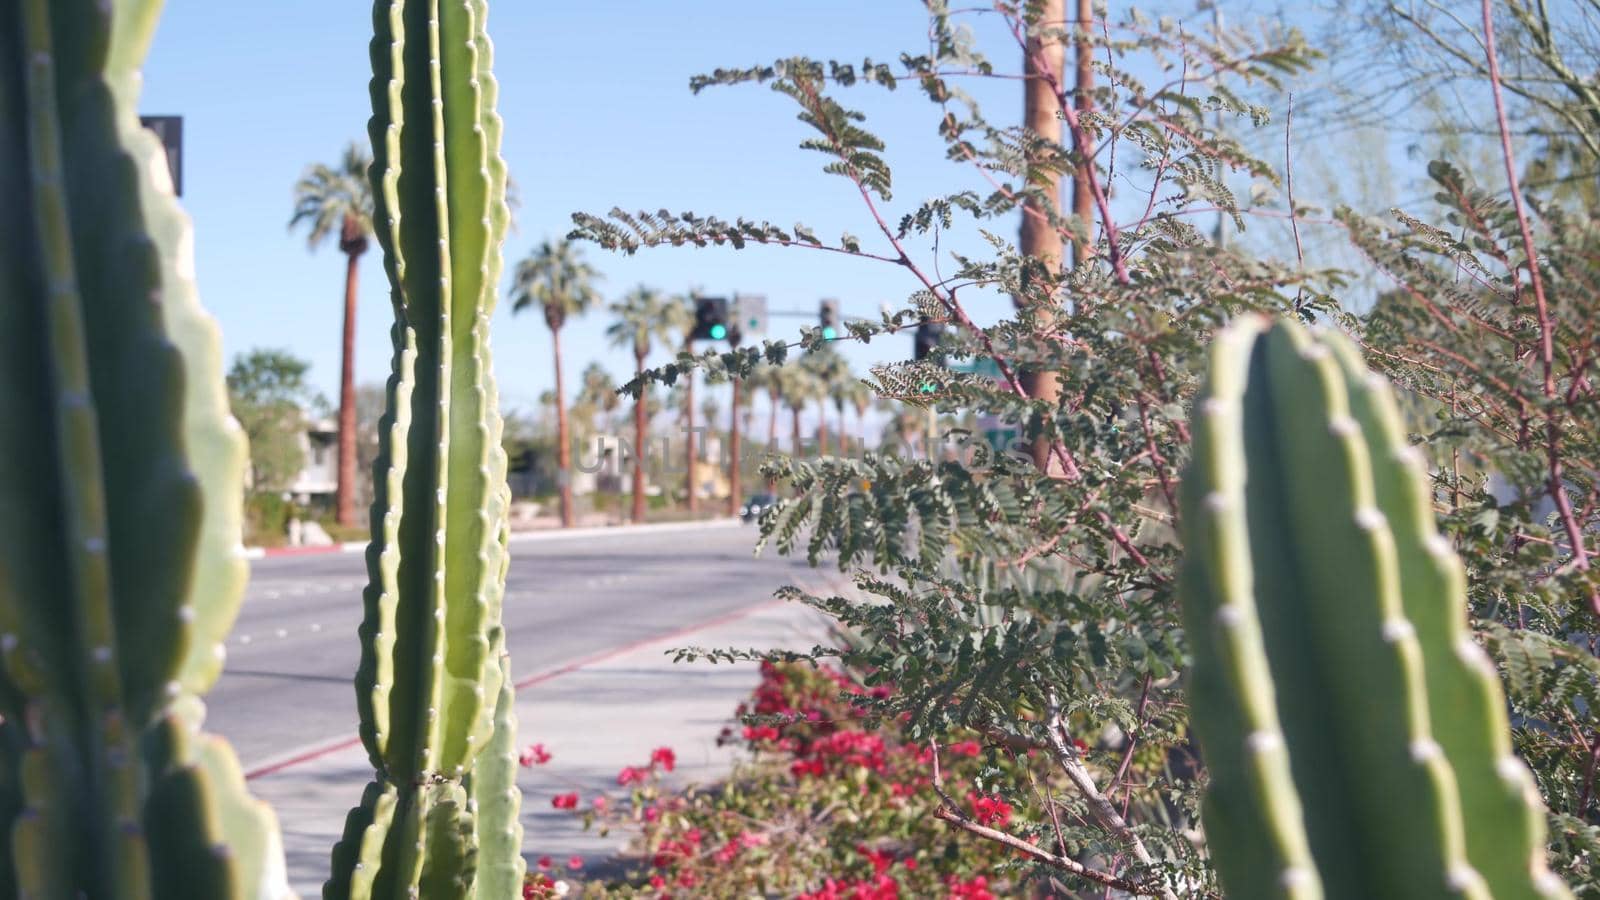 Palm trees, flowers and cactus, Palm Springs city street, California road trip. by DogoraSun